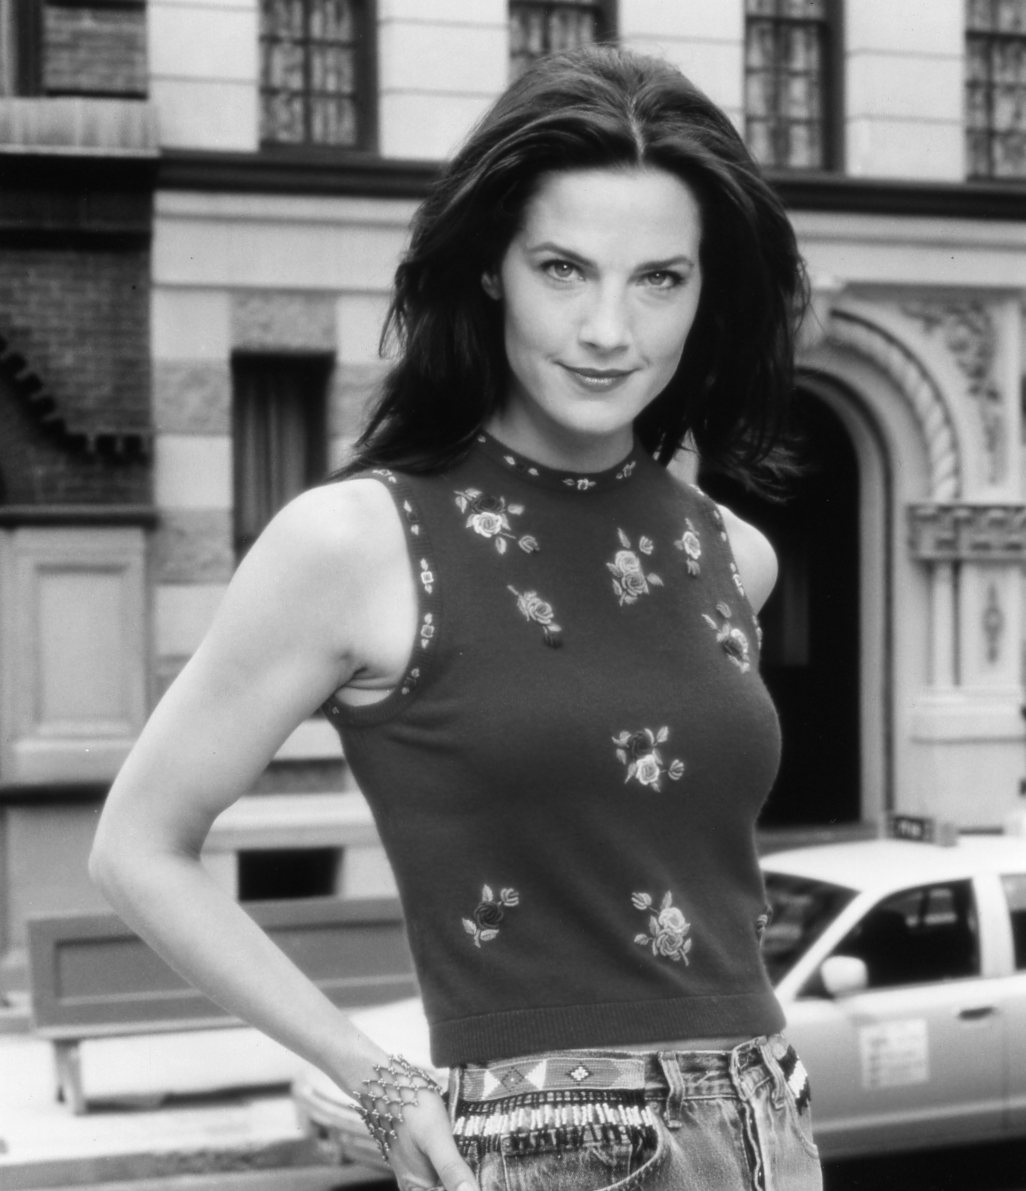 world best collections of photos and wallpapers: Terry Farrell